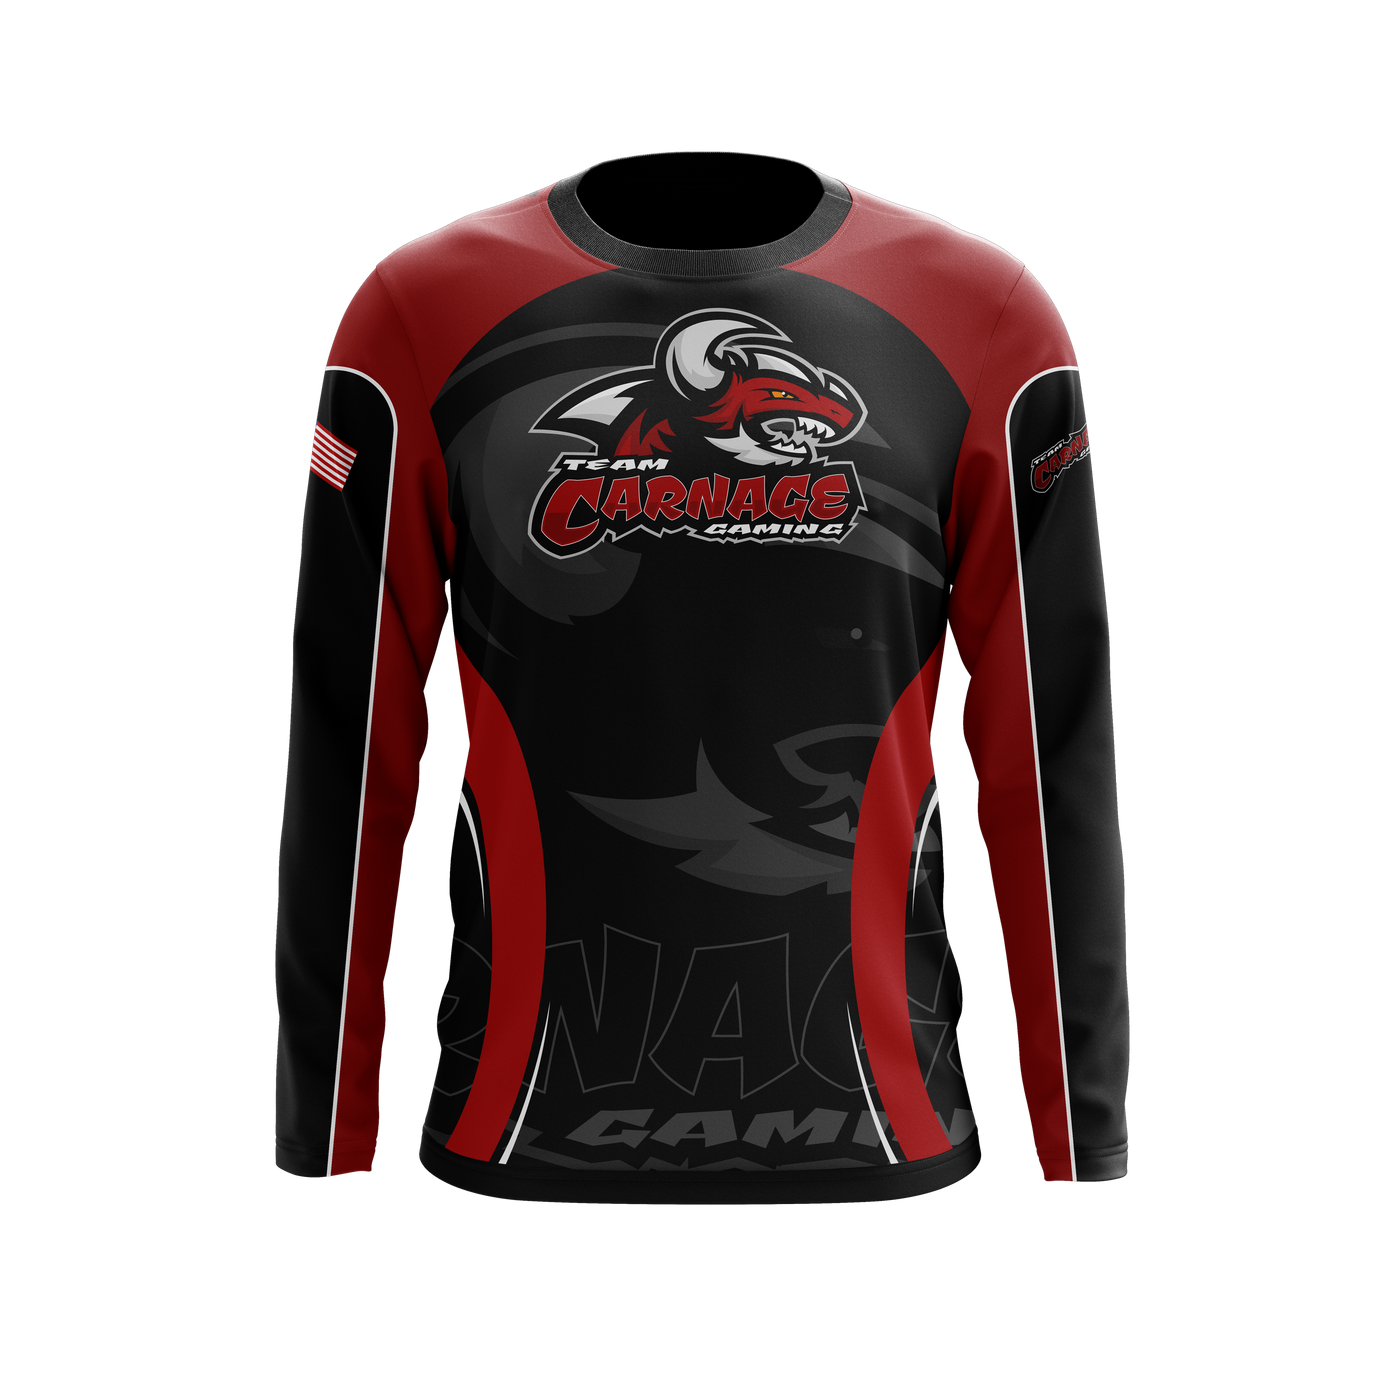 Team Carnage Long Sleeve Pro Jersey - Red